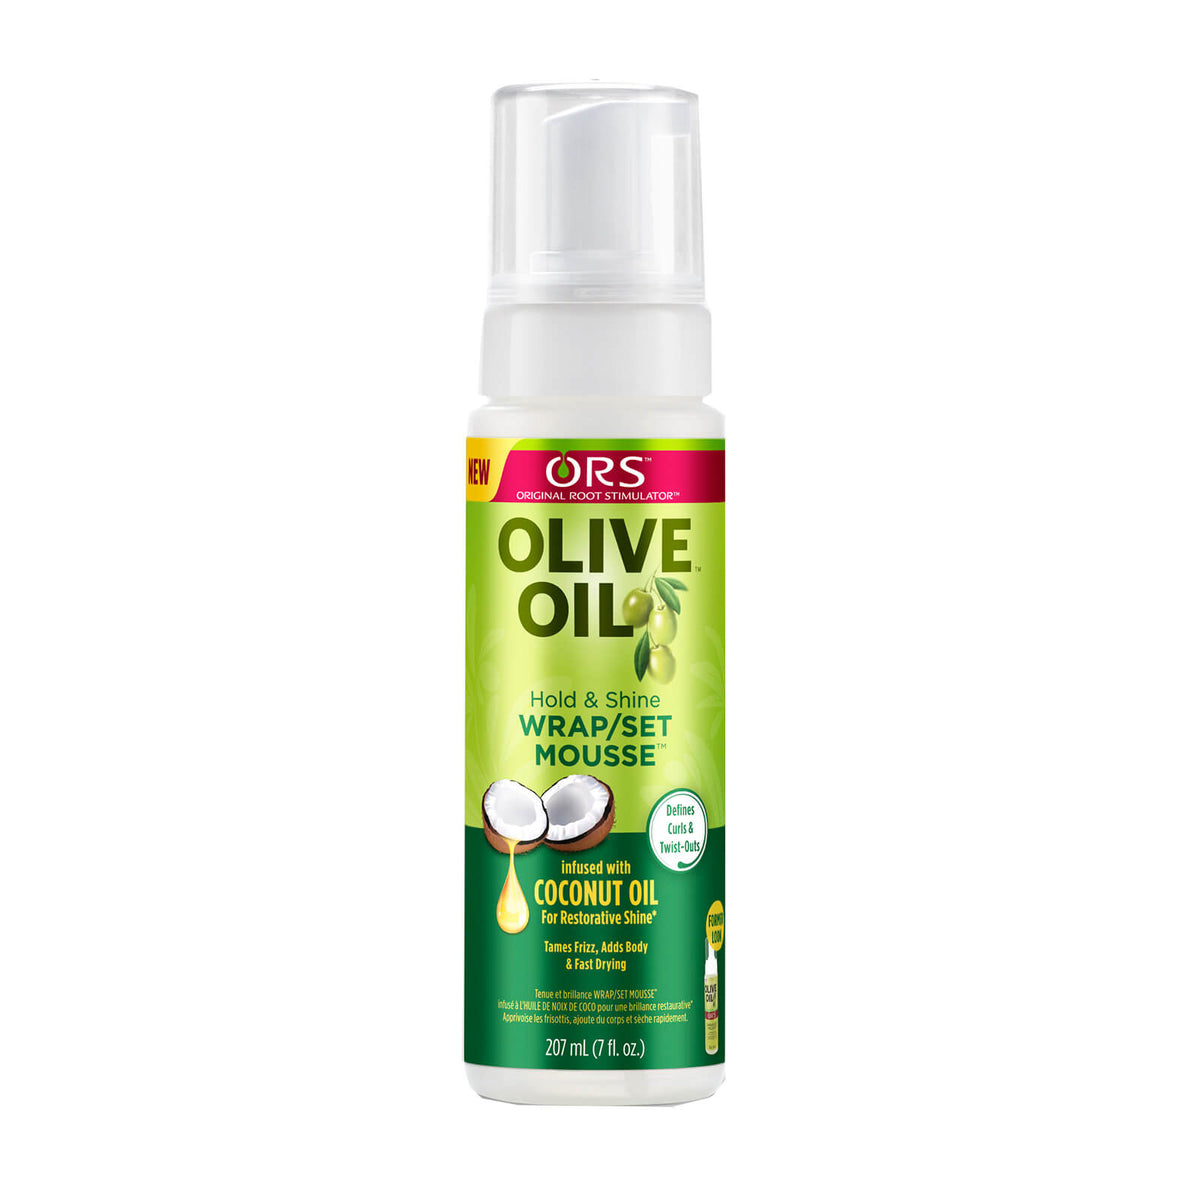 ORS Olive Oil Hold & Shine Wrap/Set Mousse, 207 ML